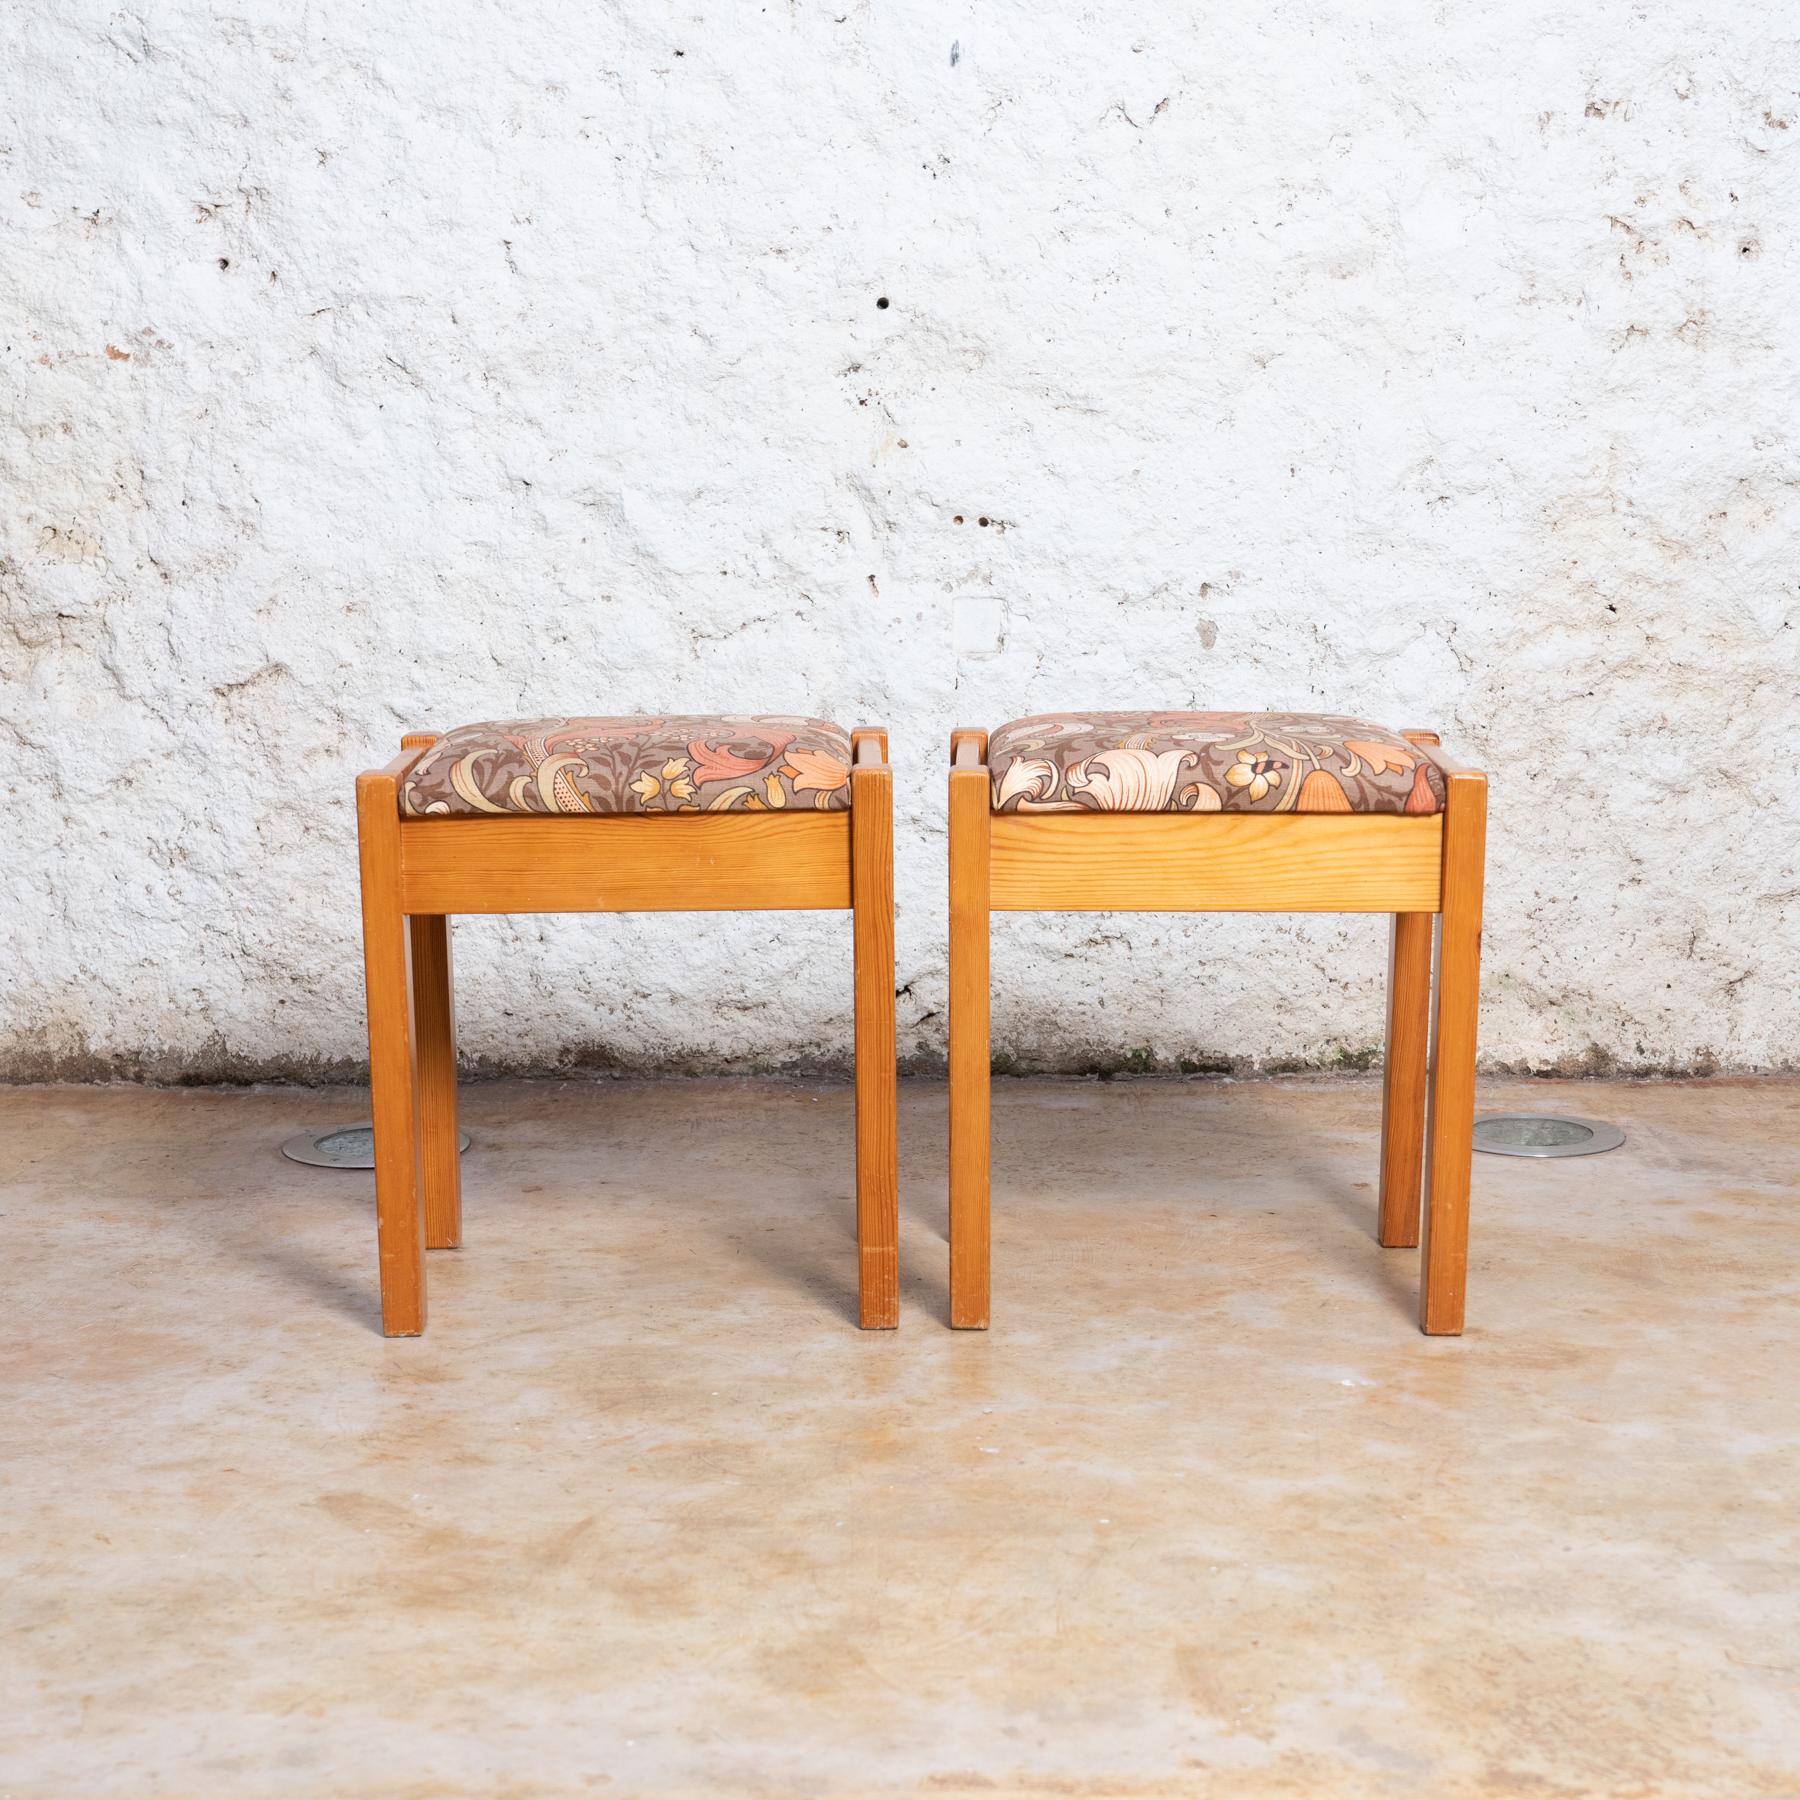 Set of two pine wood stools designed by Unknown Spanish designer, circa 1960
Made by unknown manufacturer, circa 1960

Pine wood and original upholstery fabric

In good original condition, preserving a beautiful patina, with minor wear